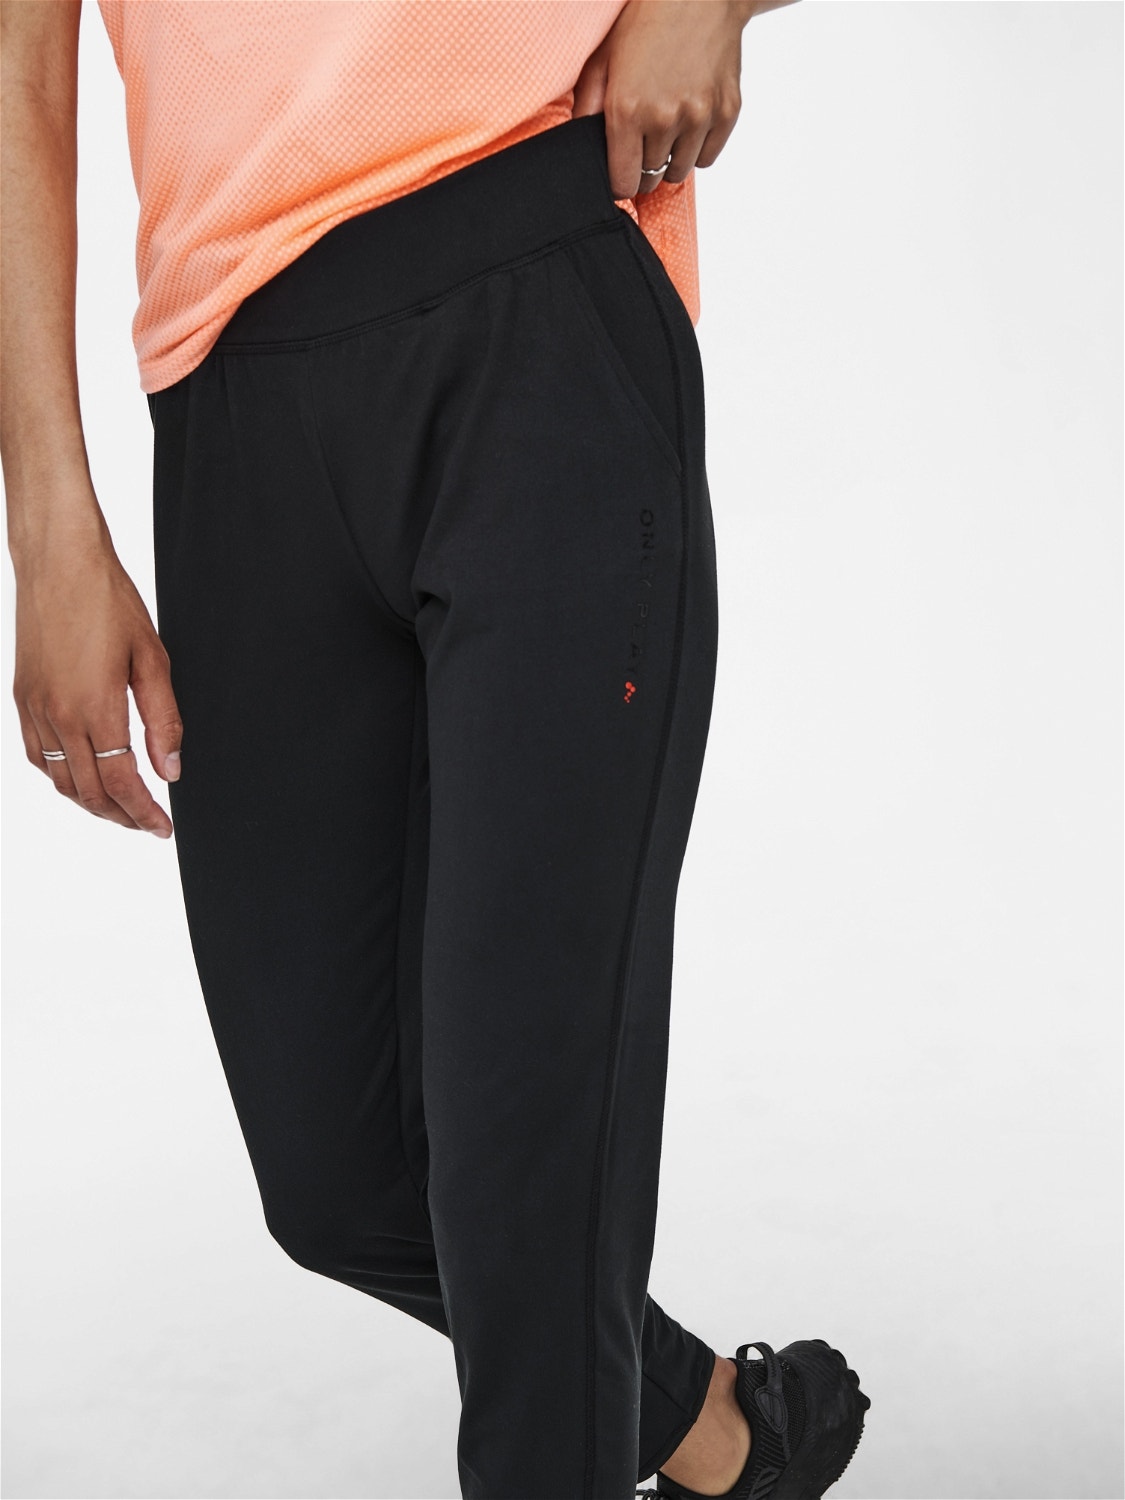 ONLY Slim fitted Trousers -Black - 15189168